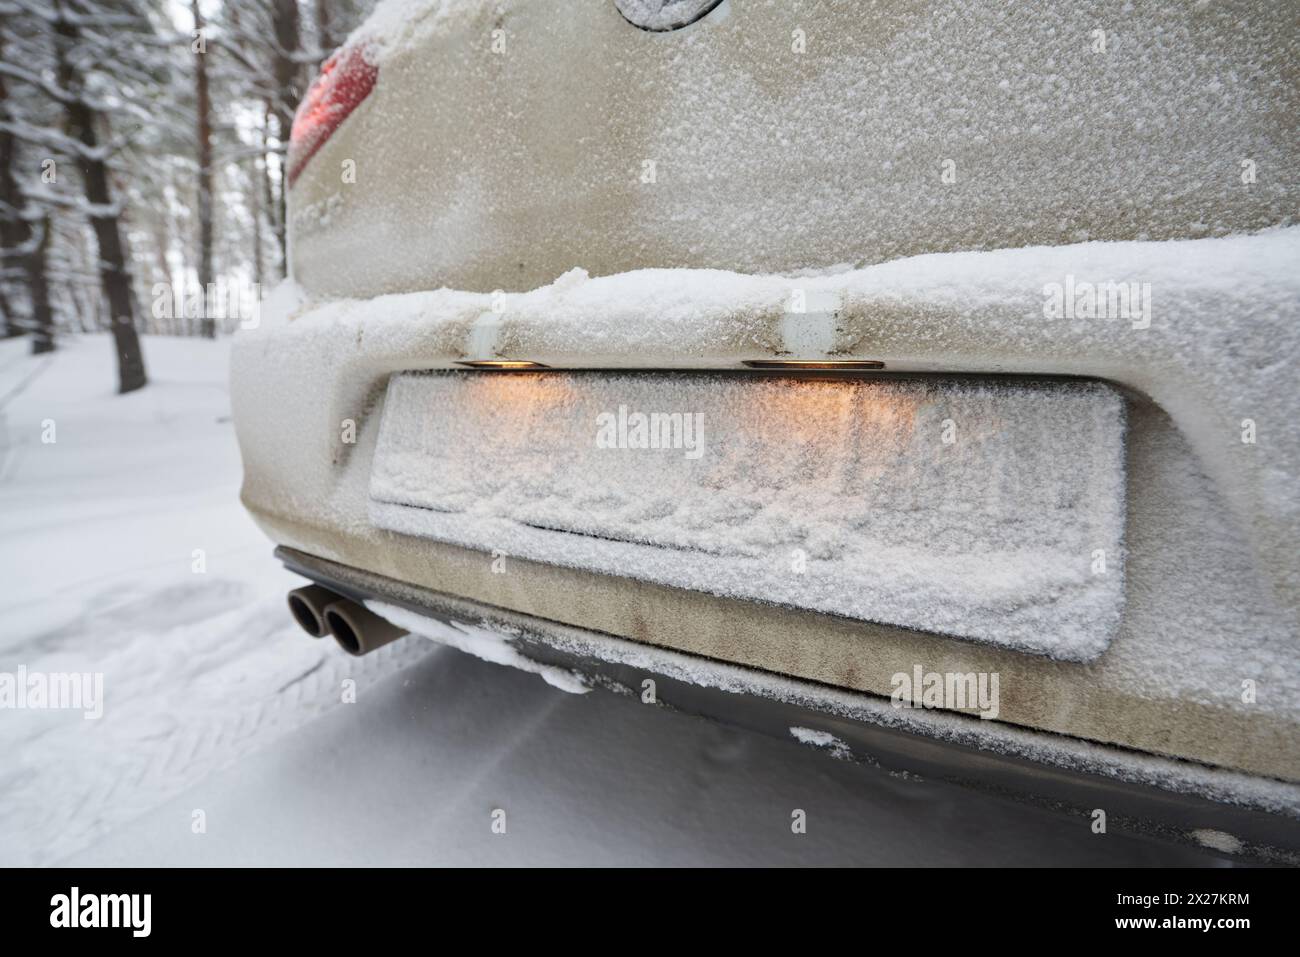 The license plate on the car is hidden by the snow. Stock Photo